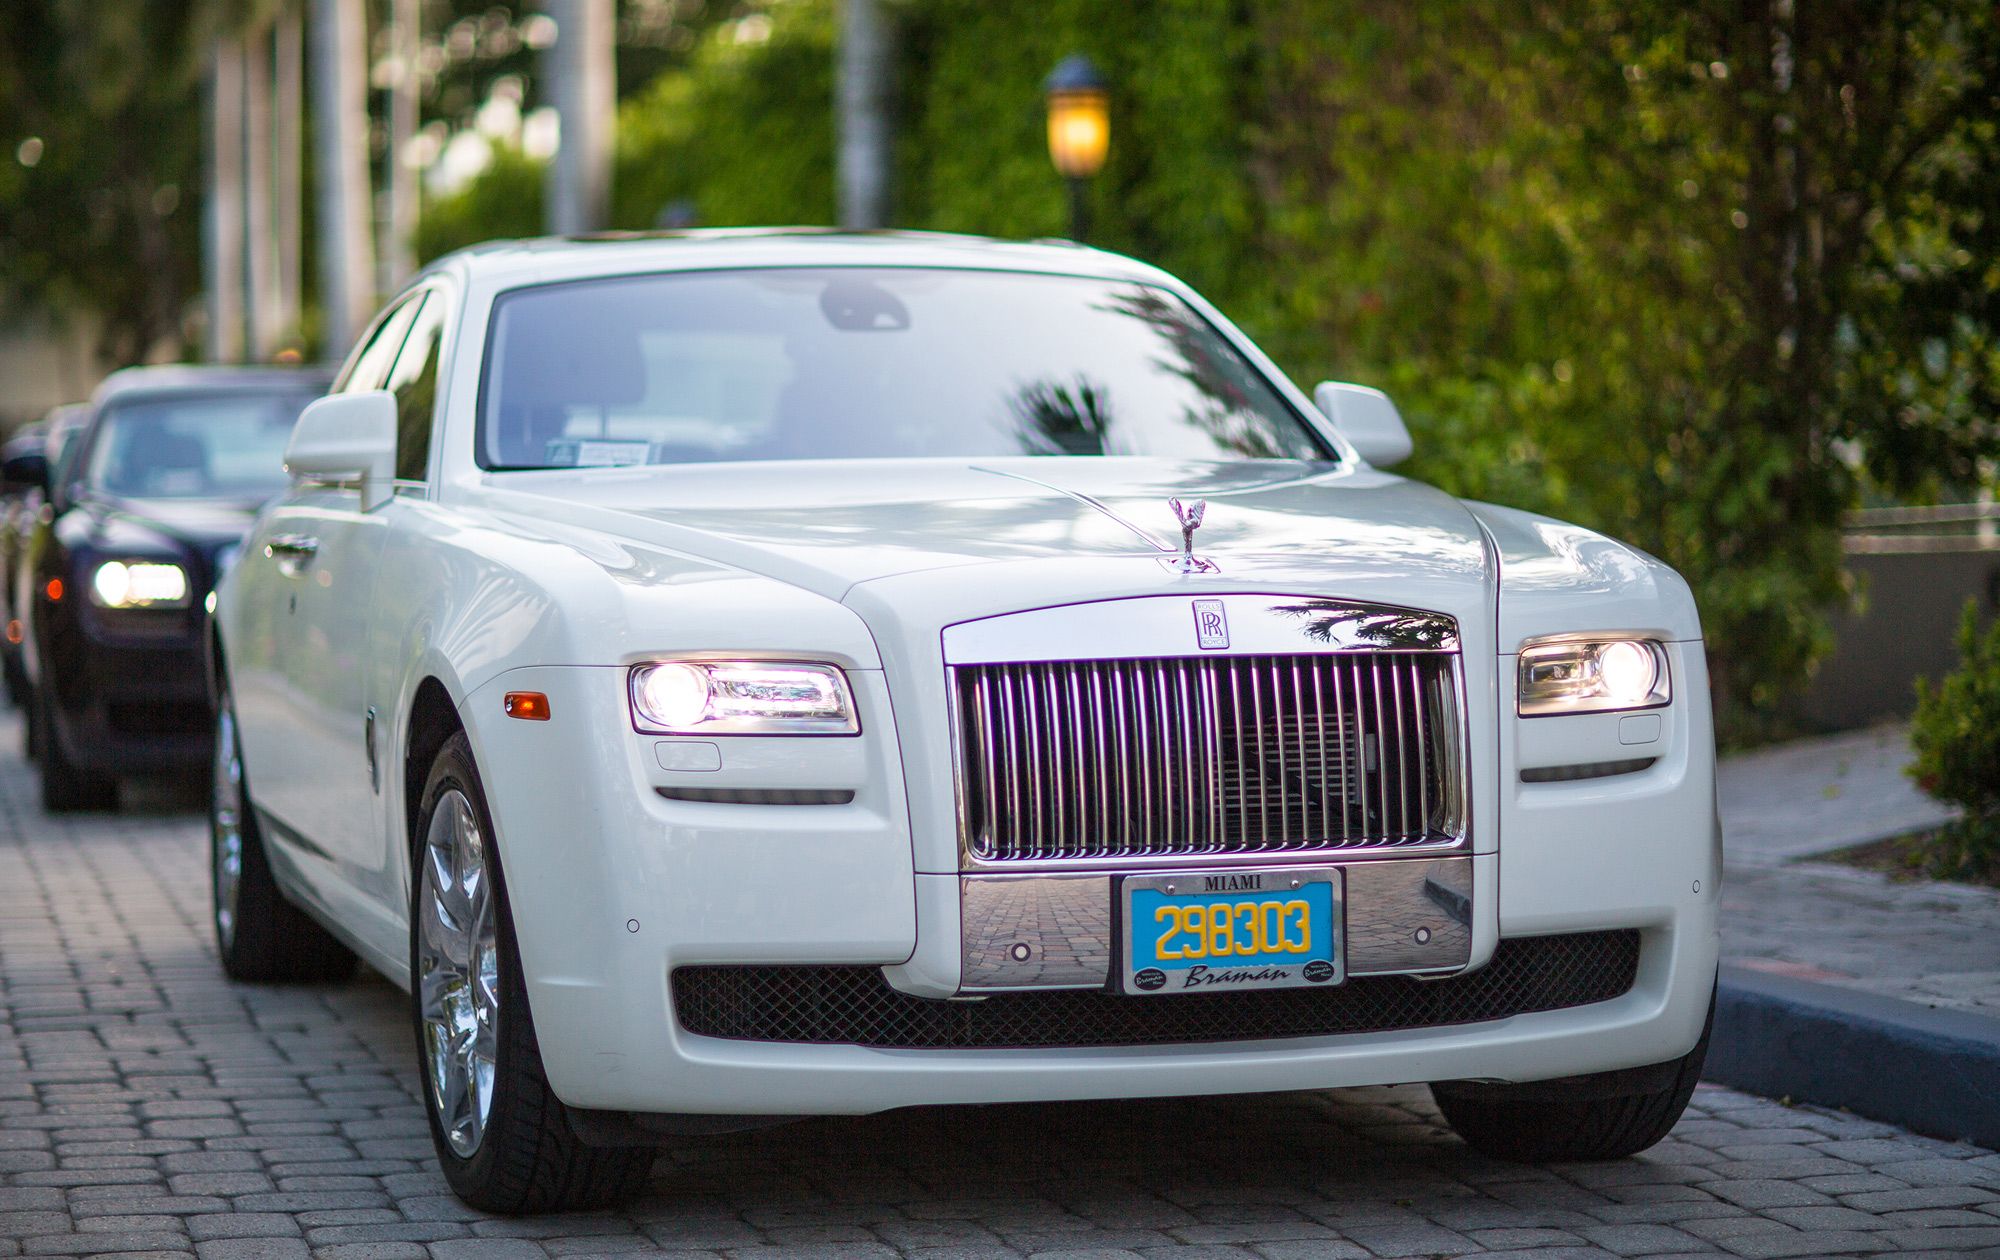 Sandals Rolls Royce Private Transfer